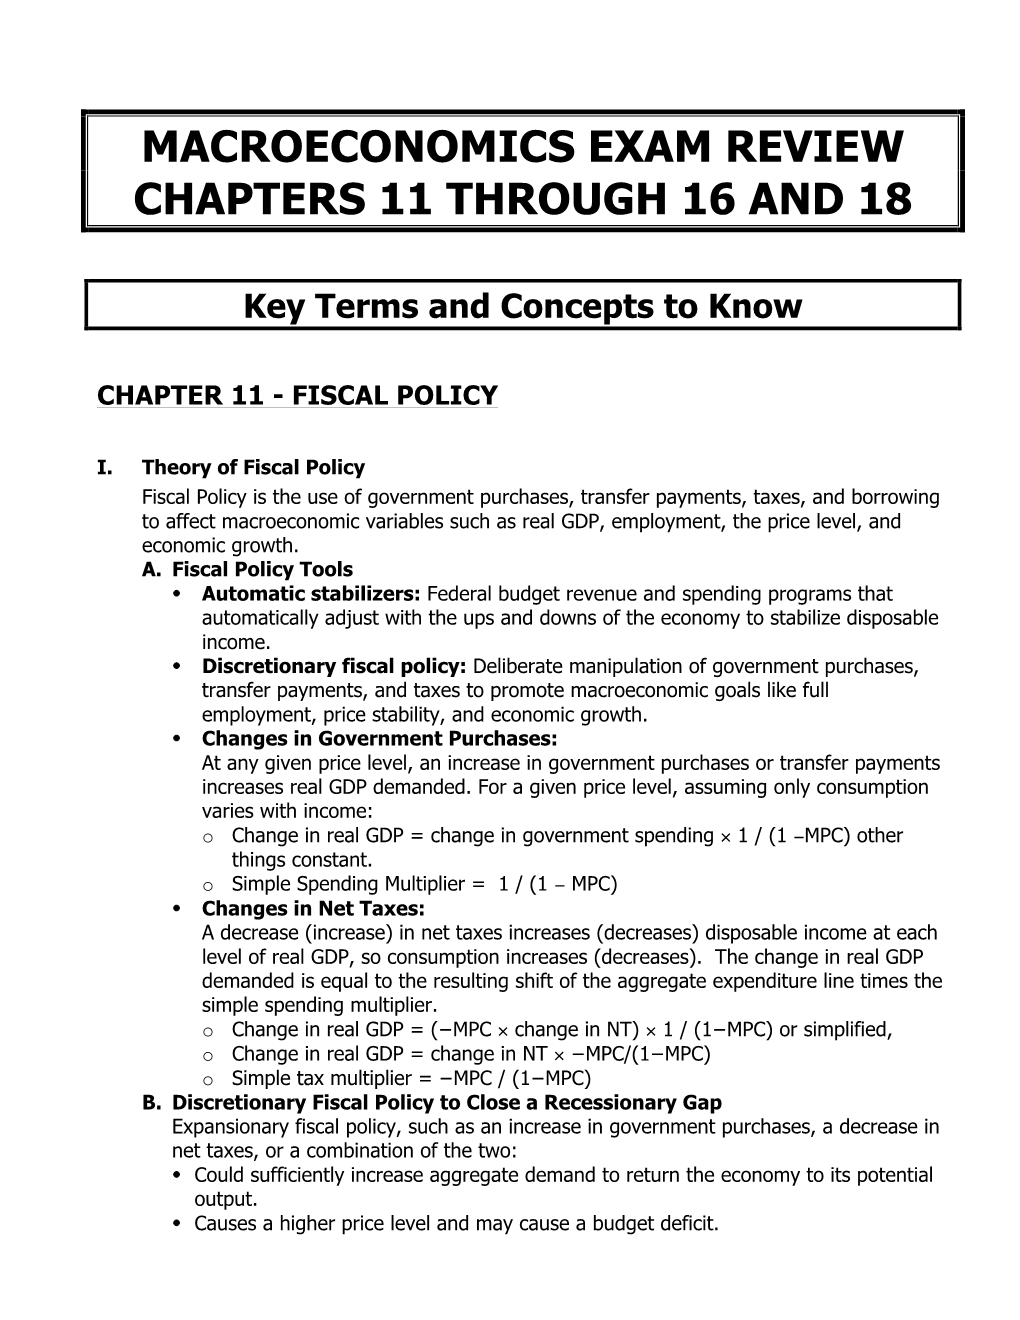 Chapter 11 - Fiscal Policy